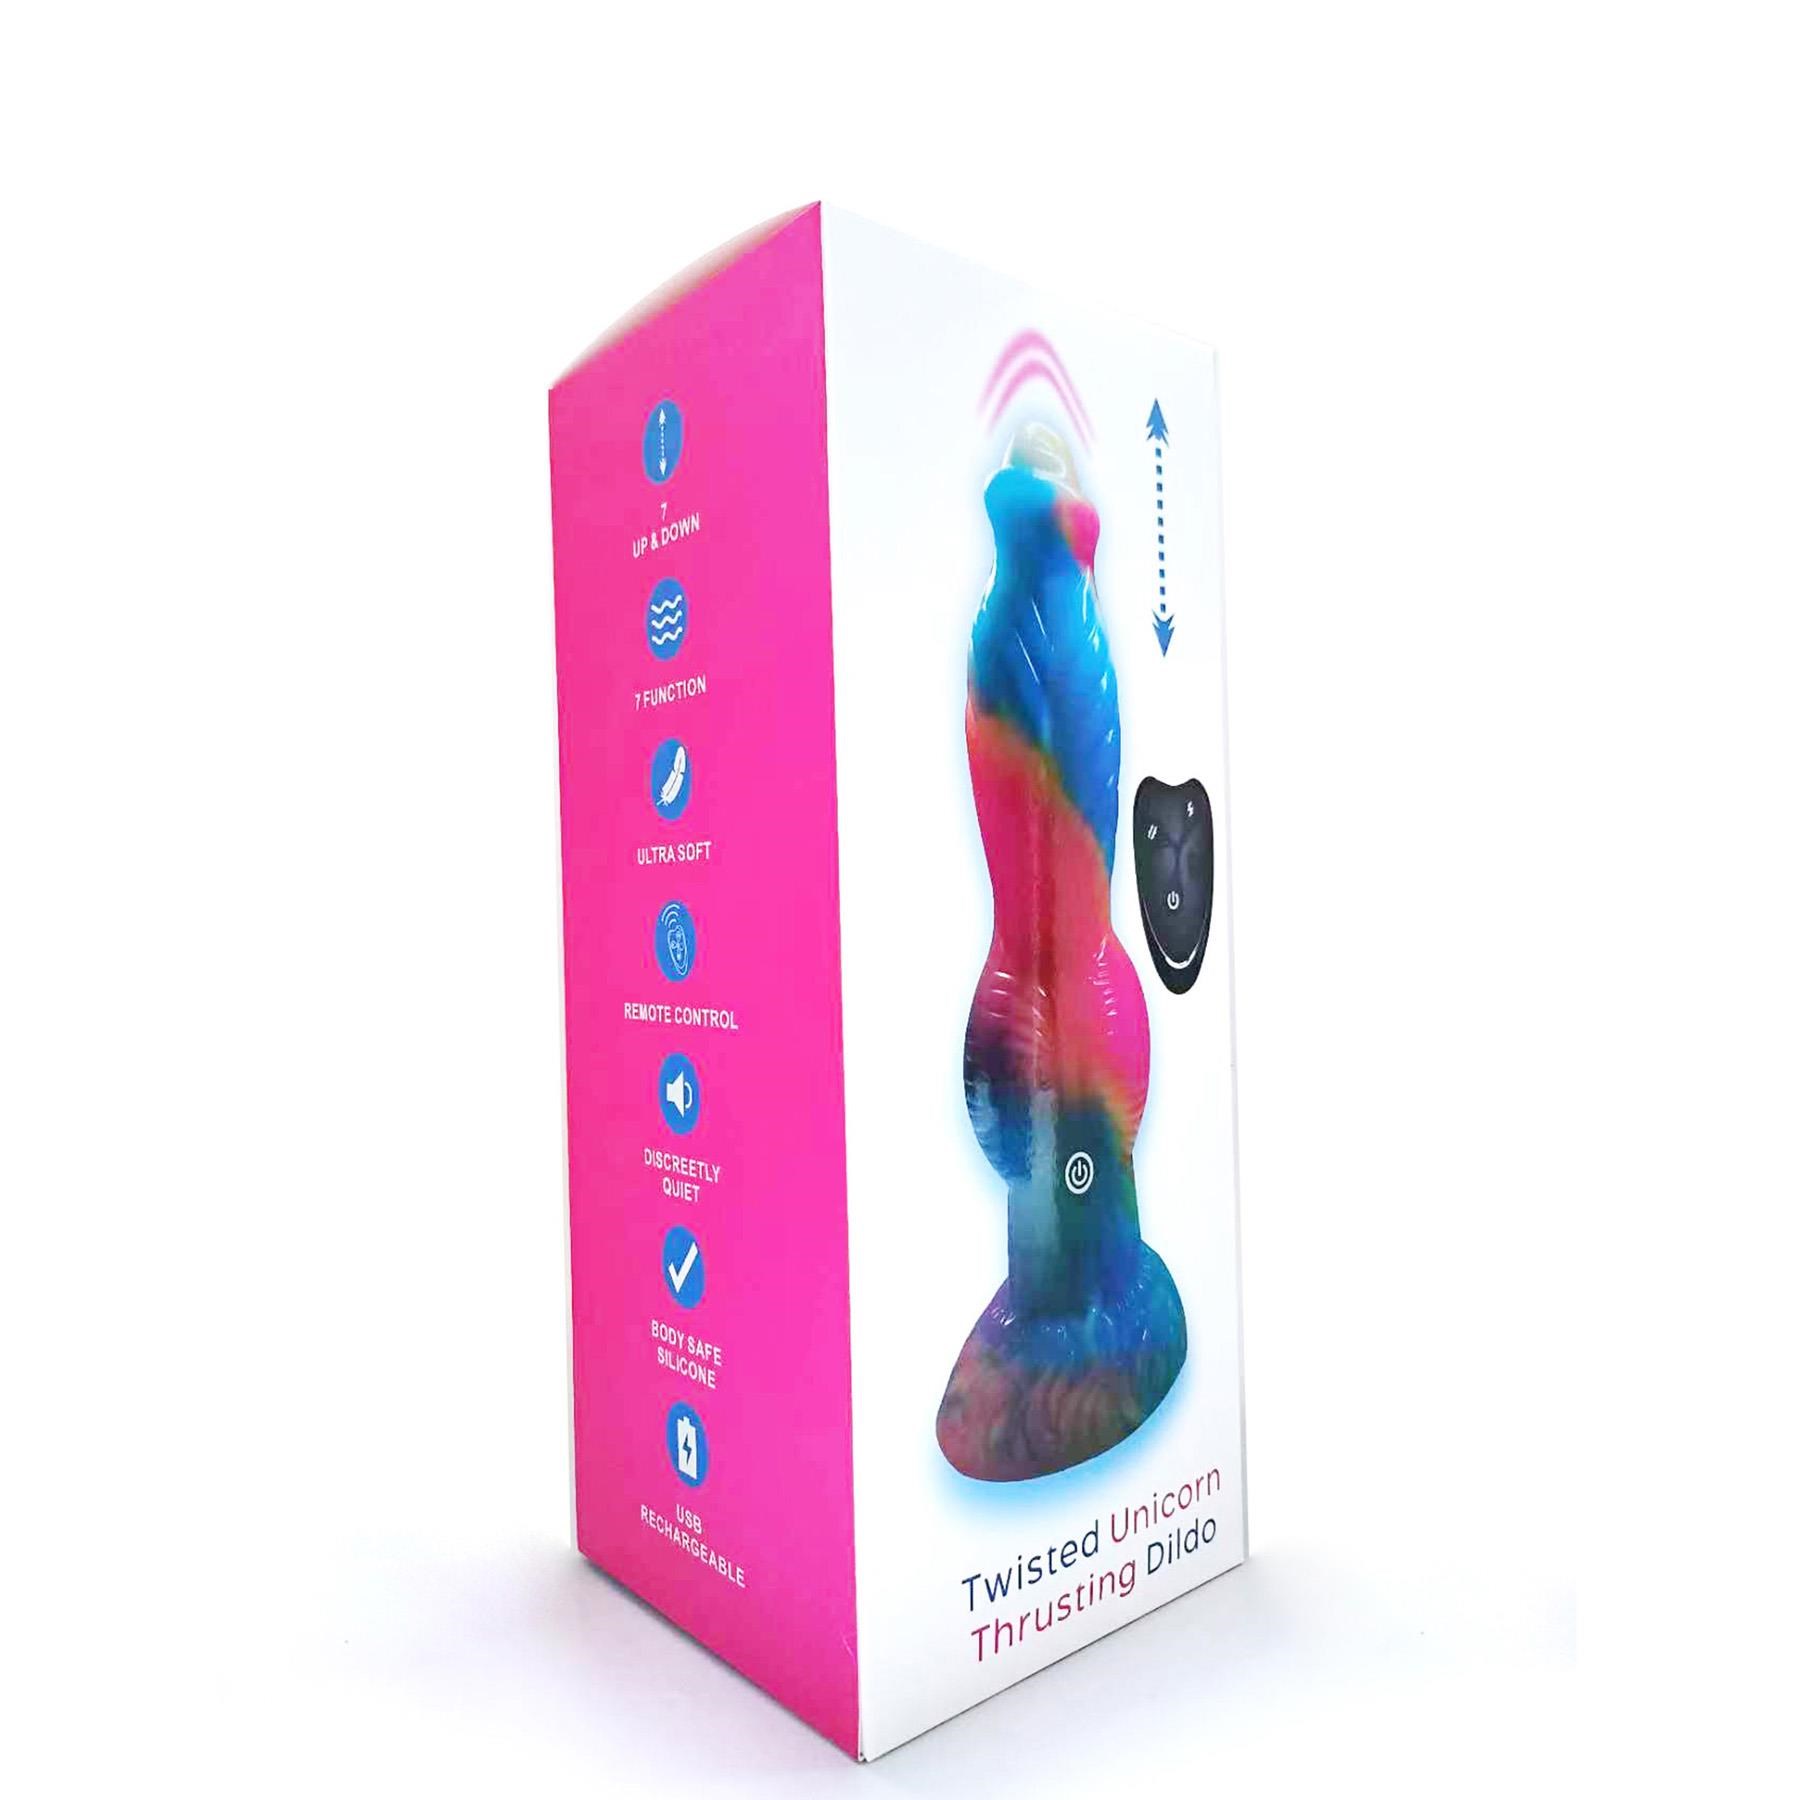 Twisted Unicorn Remote Control Thrusting Dildo - Packaging Shot